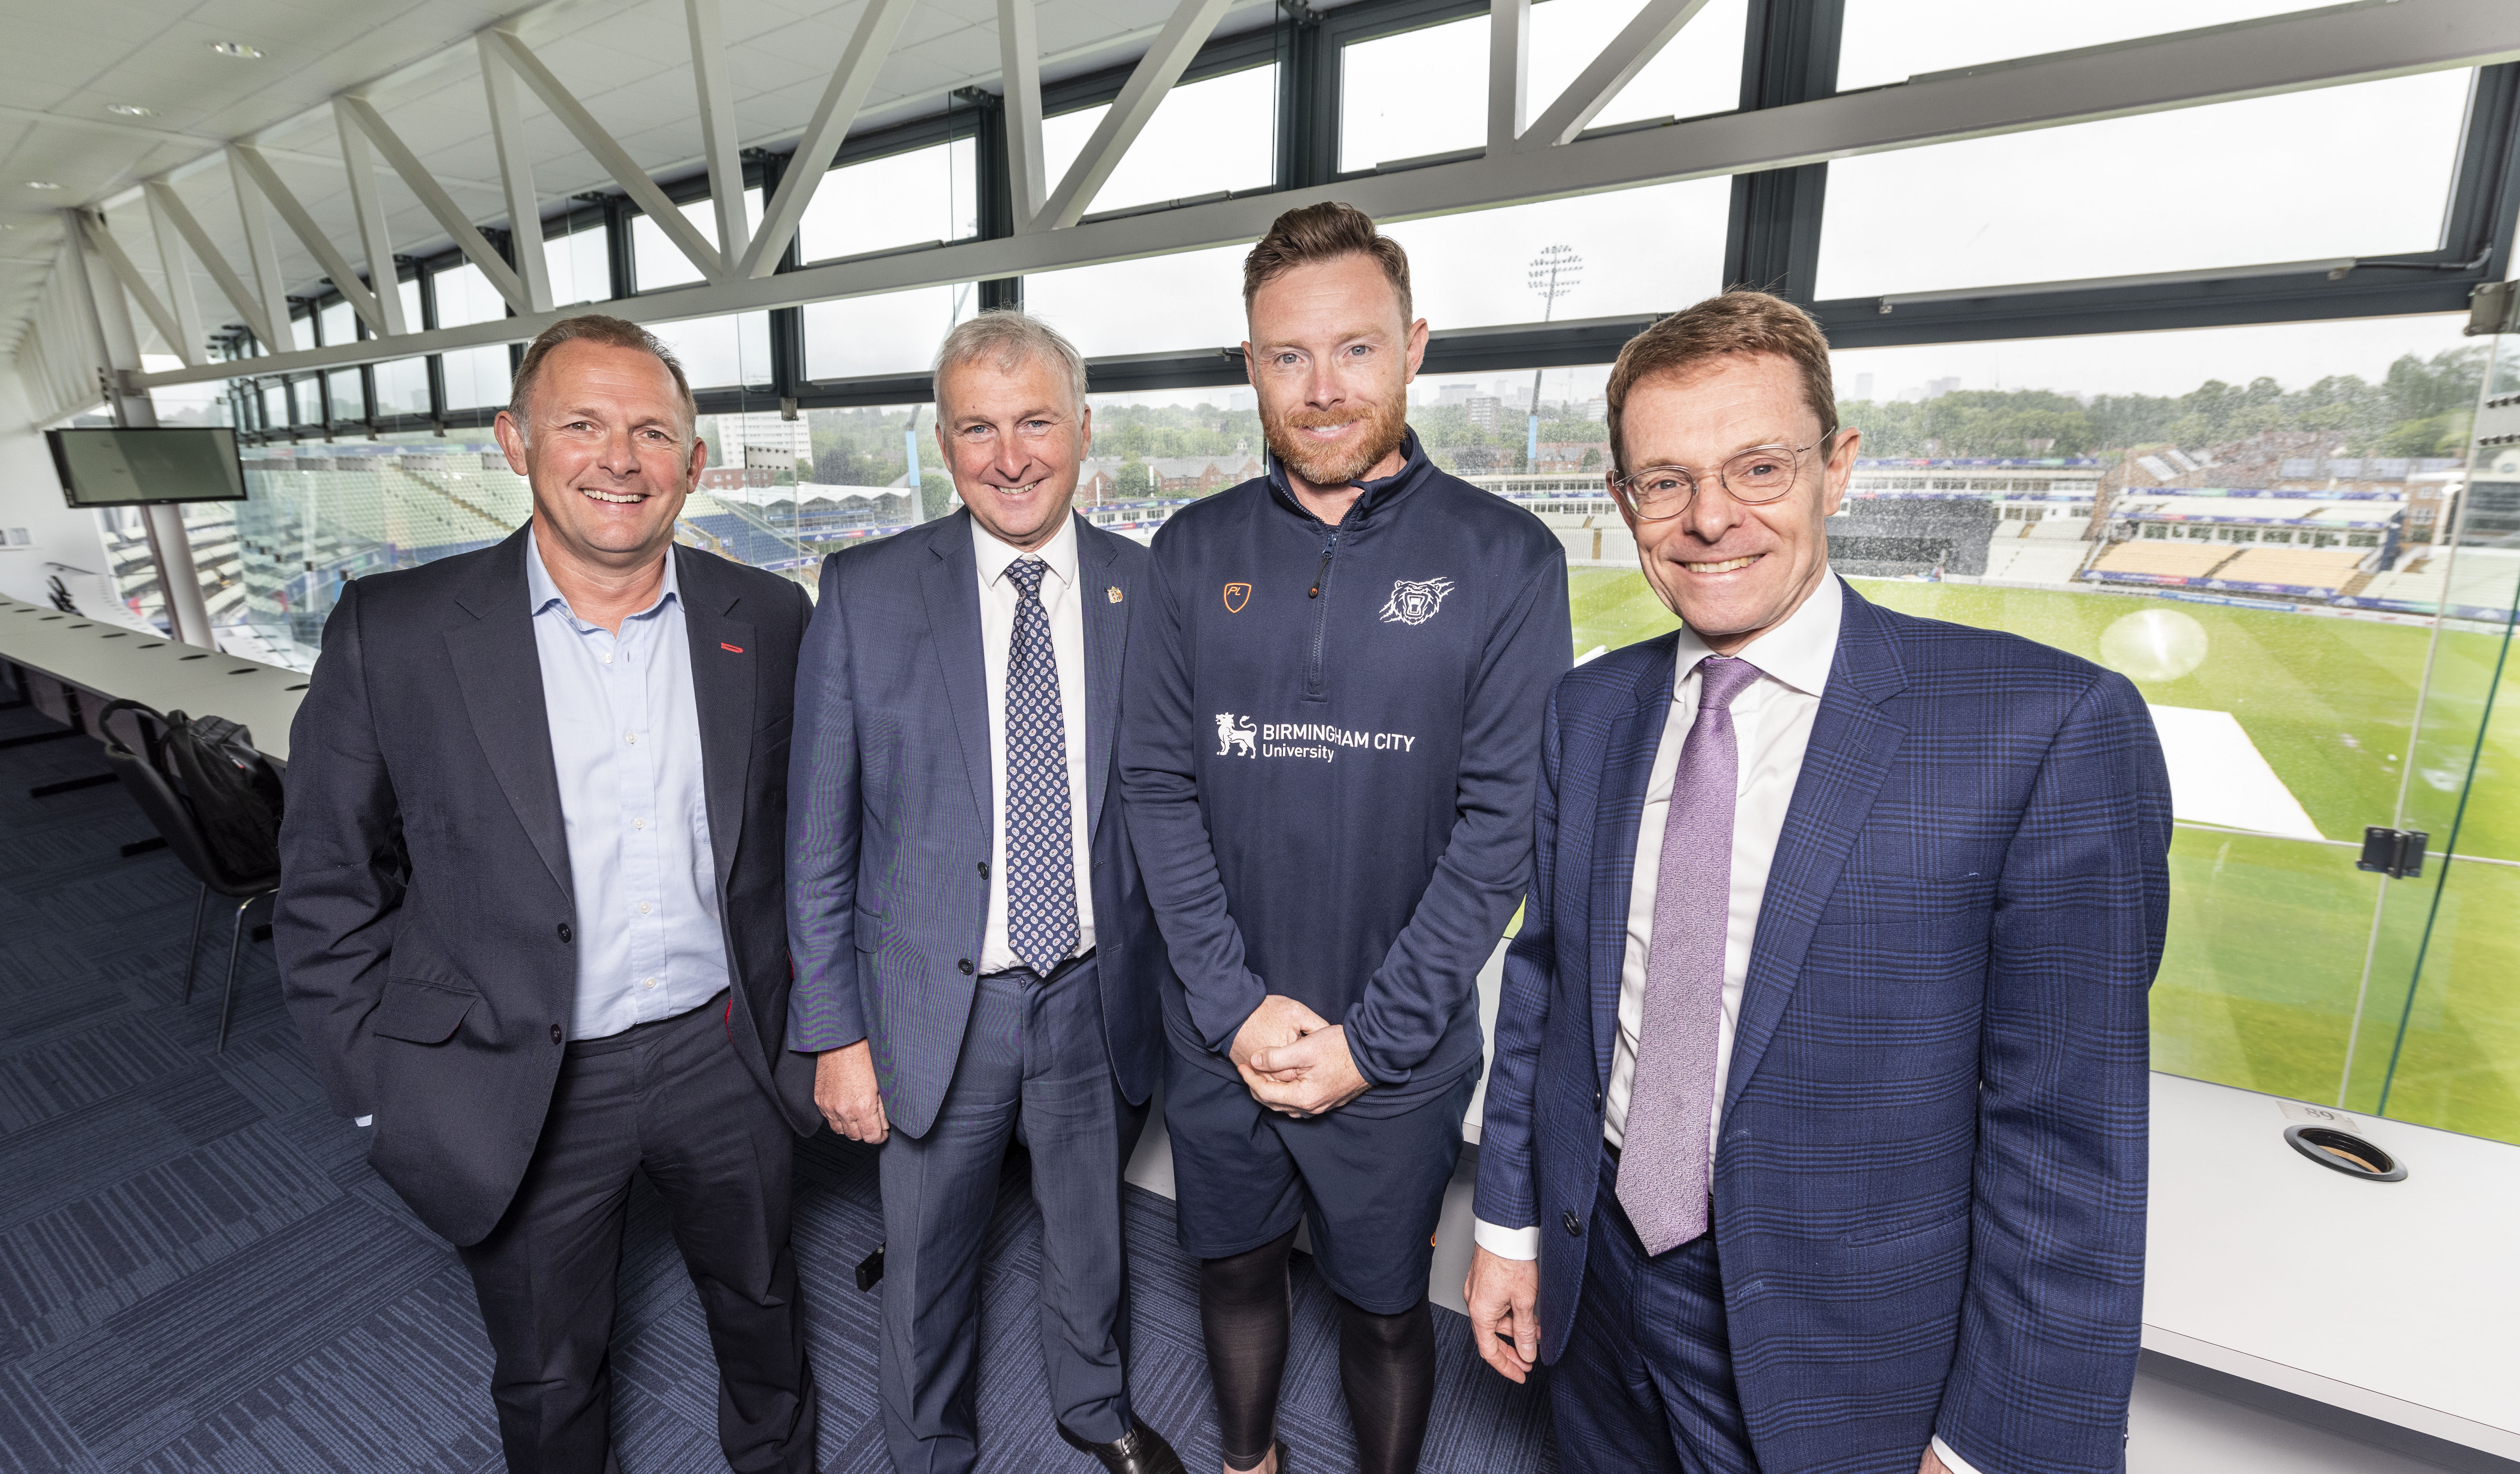 Chief executive of Warwickshire CCC Neil Snowball, Birmingham City Council leader Ian Ward, Ian Bell Warwickshire CCC and Mayor of the West Midlands Andy Street